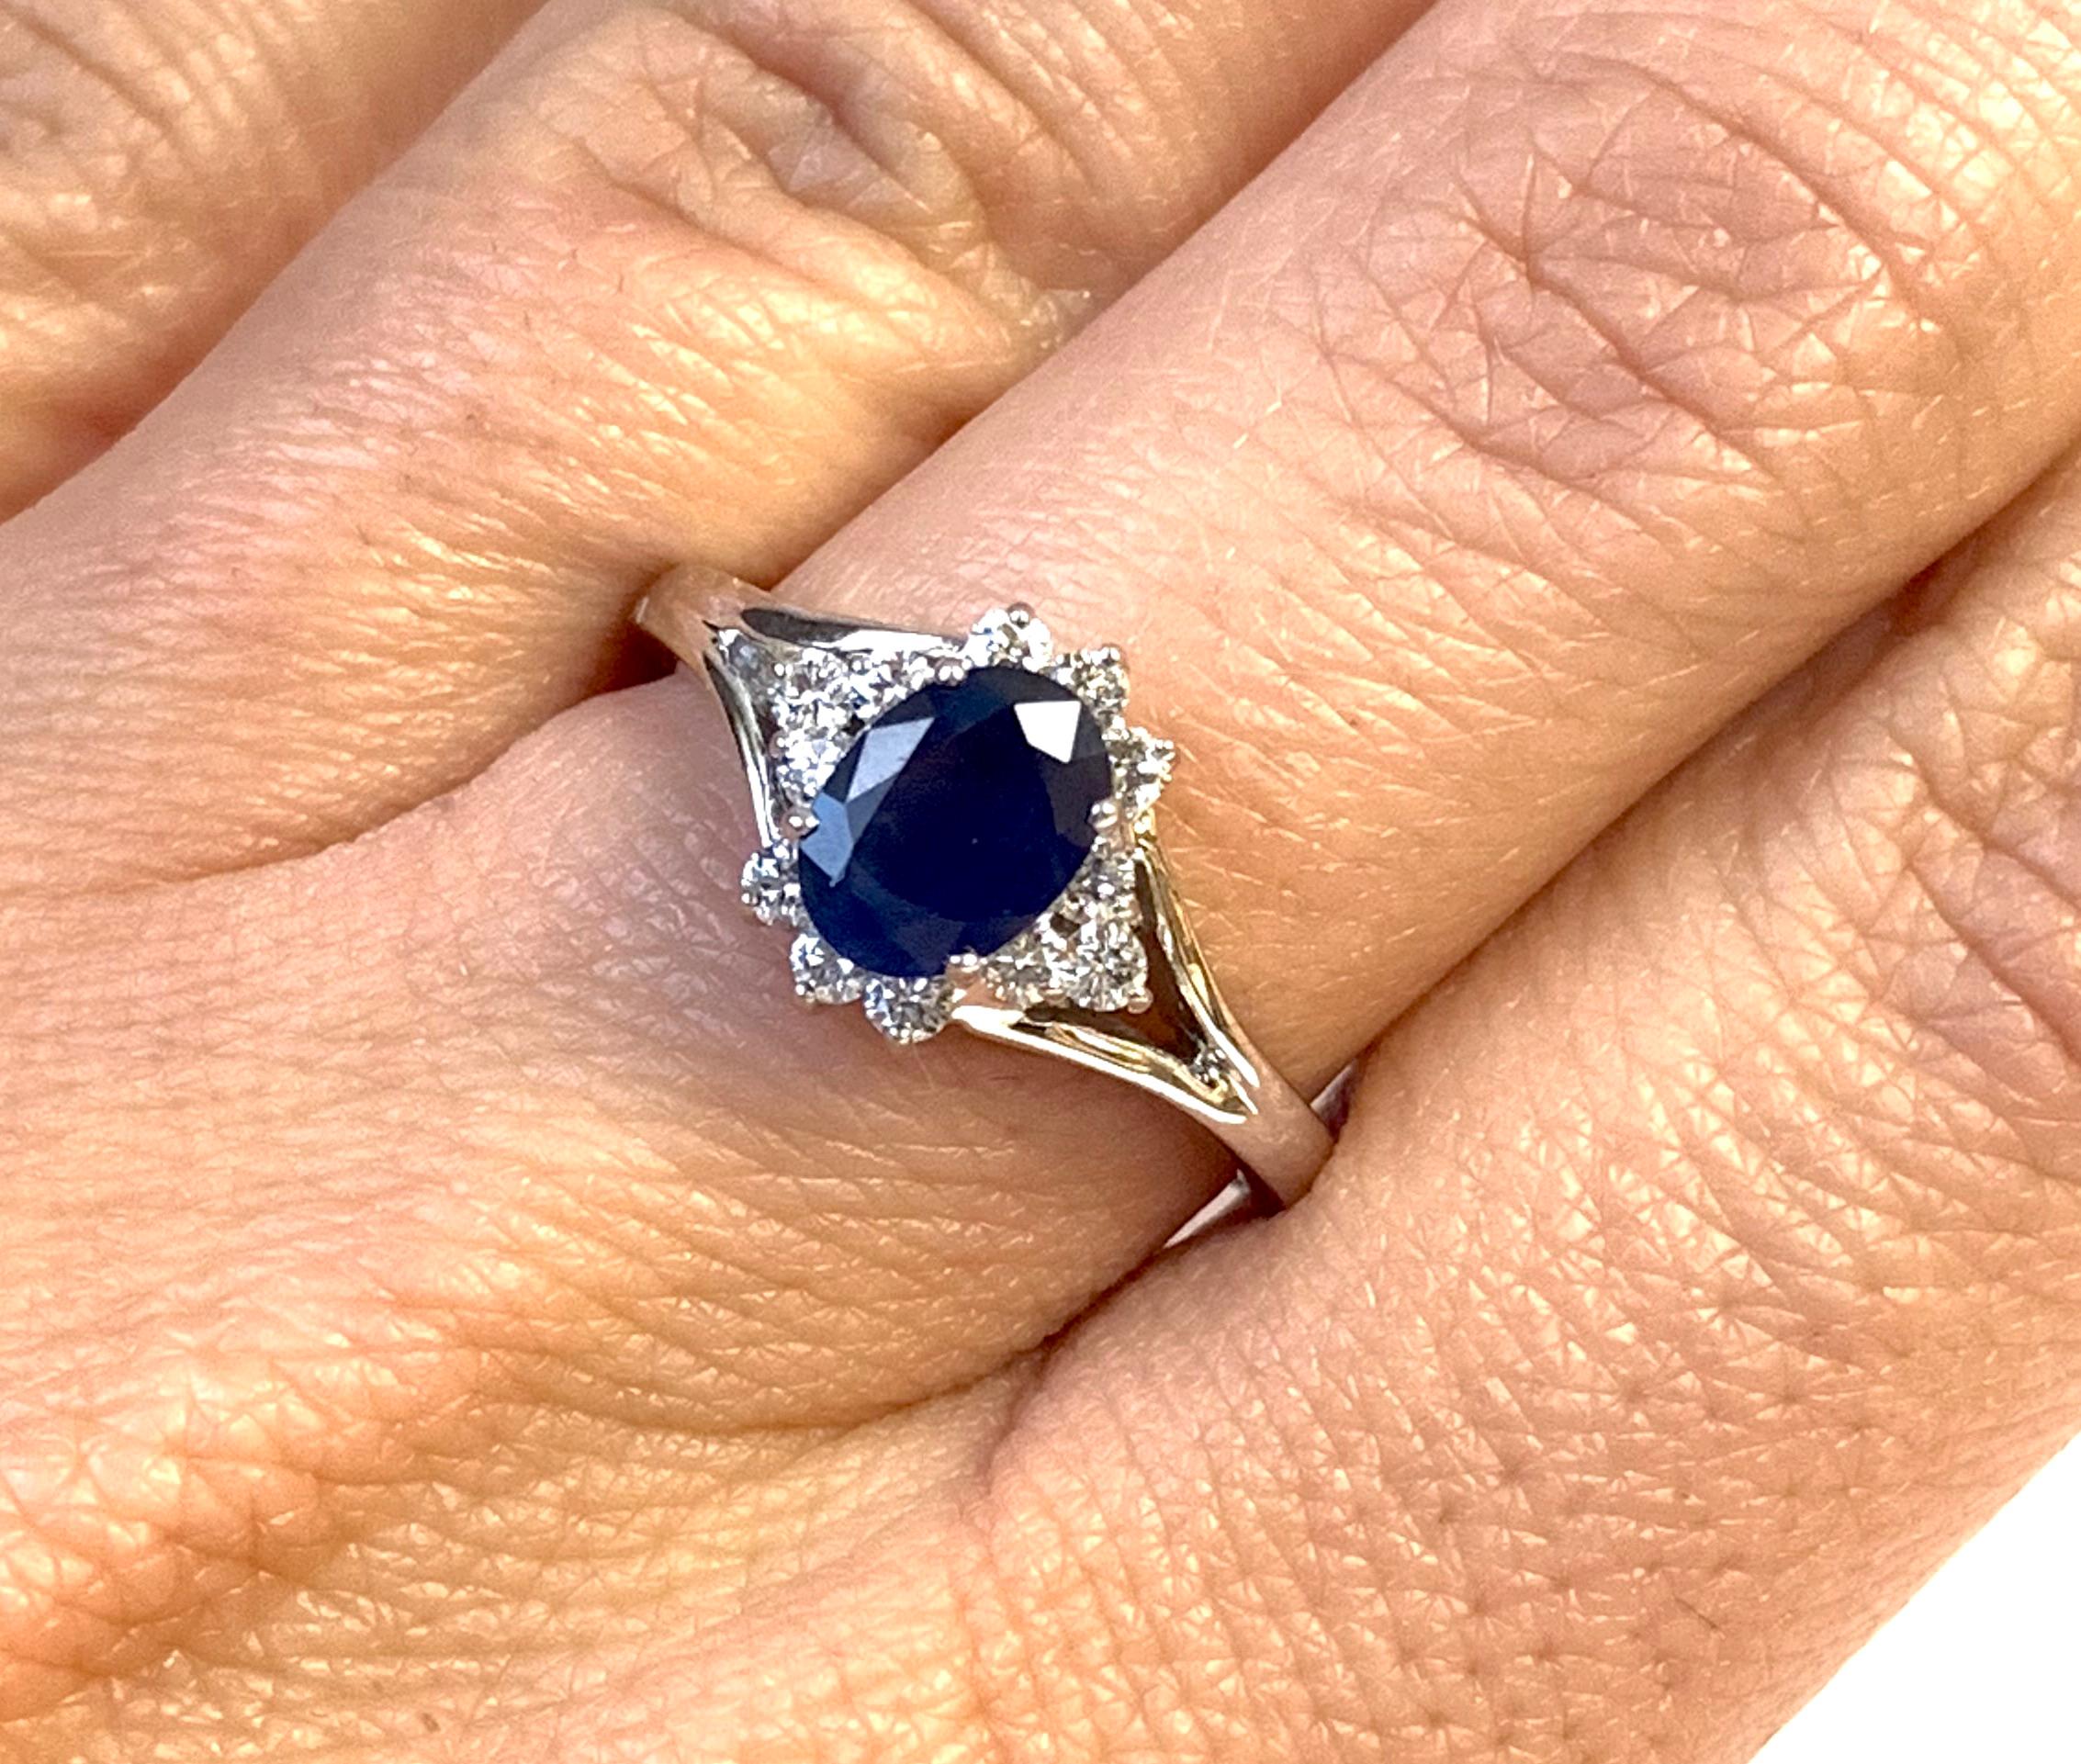 Material: 14k White Gold
Gemstones: 1 Oval Blue Sapphire at 0.92 Carats. 
Diamonds: 12 Brilliant Round White Diamonds at 0.22 Carats. SI Clarity / H-I Color. 
Ring Size: 6.25 (Can be sized)

Fine one-of-a-kind craftsmanship meets incredible quality